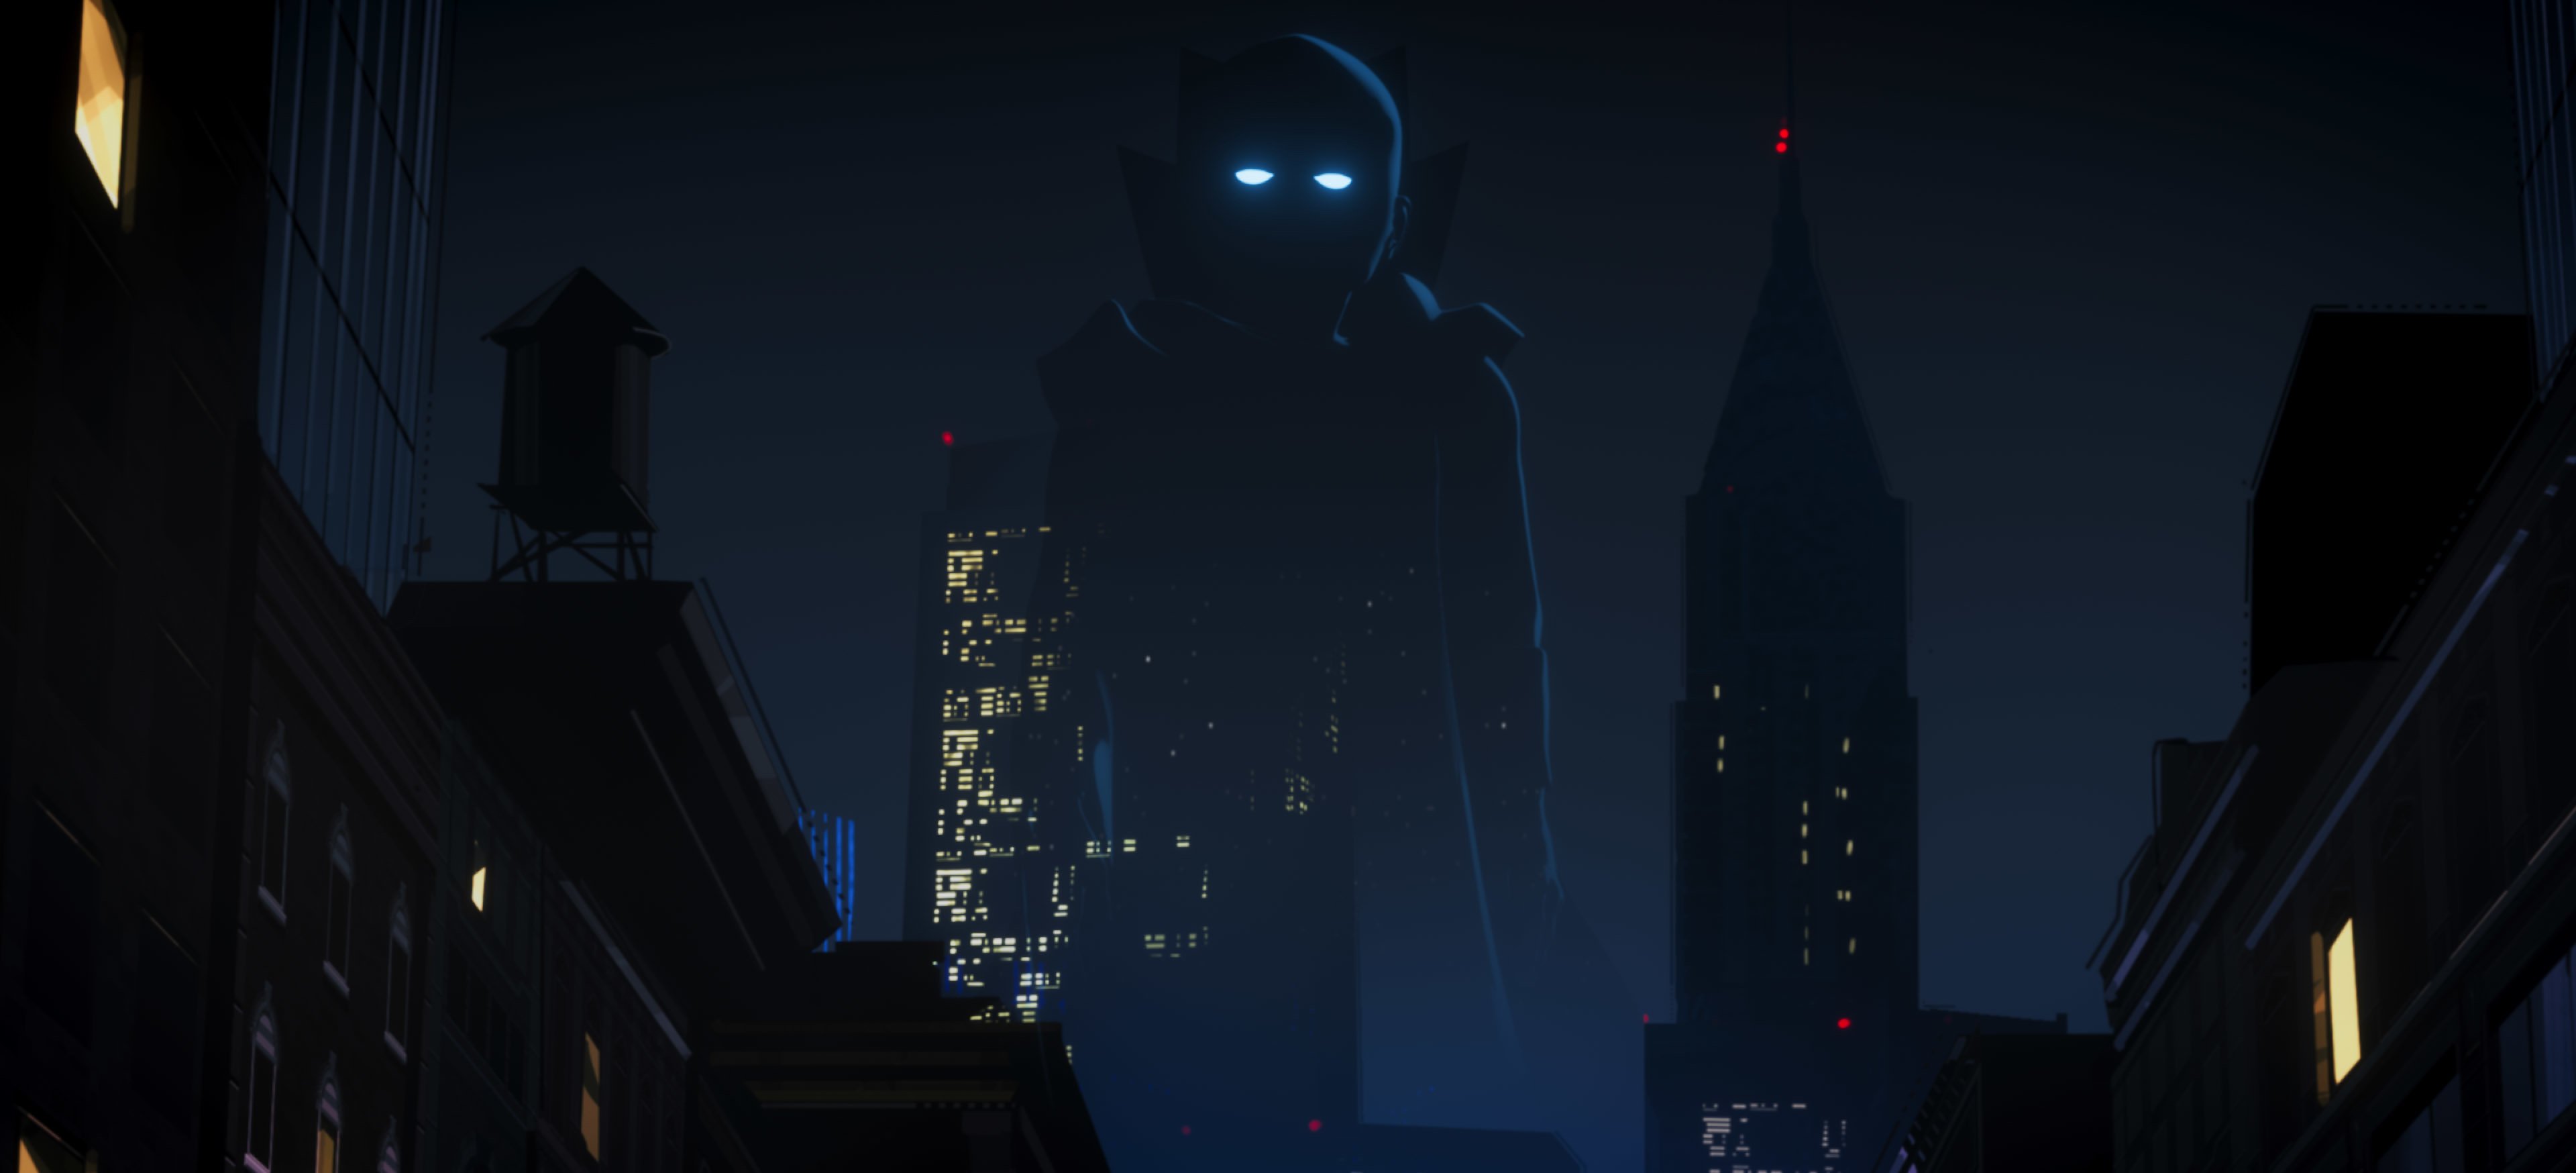 The Watcher watches over the city